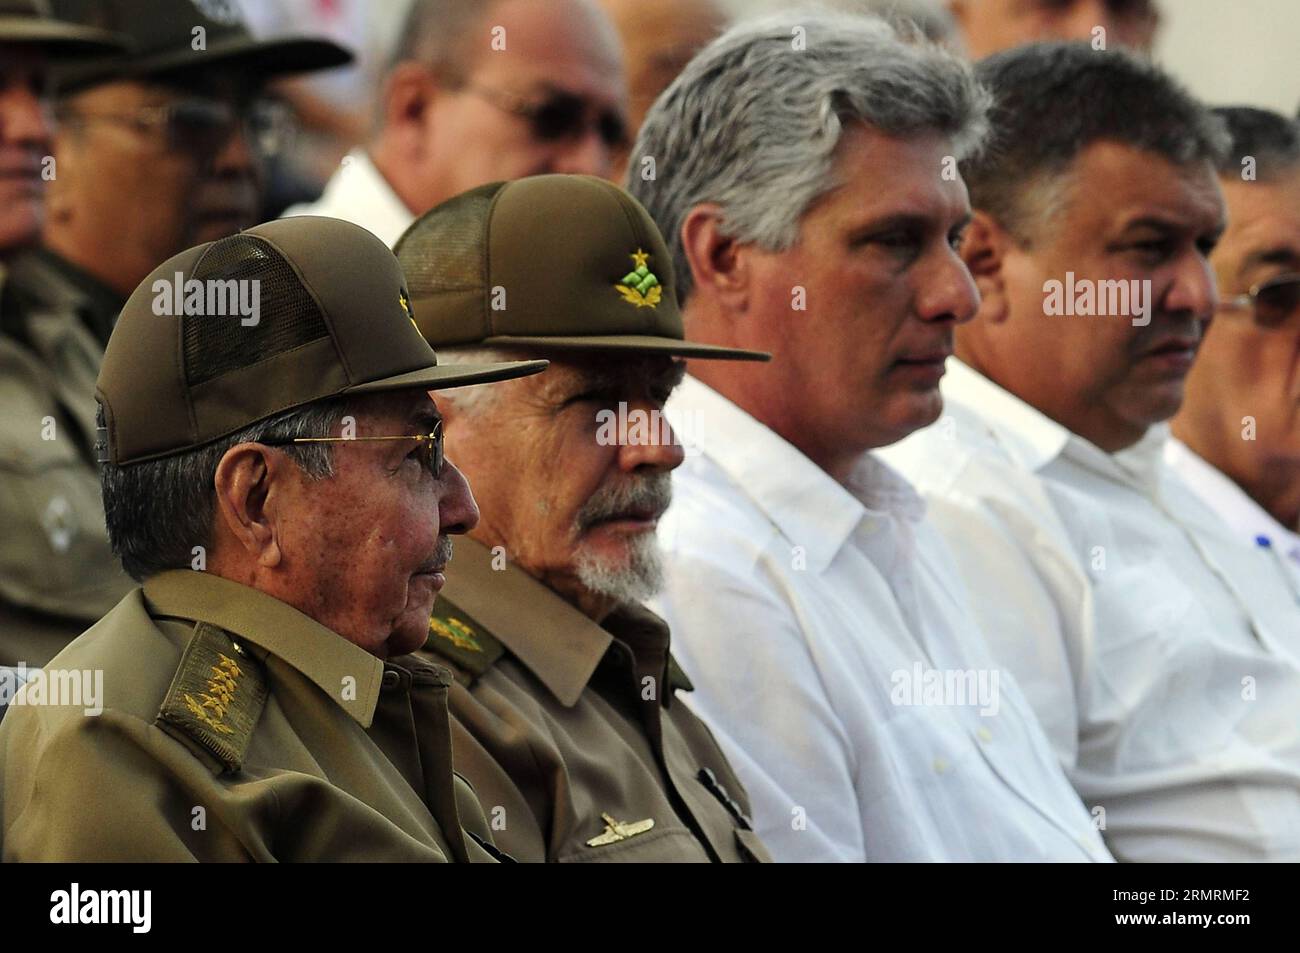 The President of Cuba, Raul Castro(1st L) attends the commemoration ceremony of the National Rebellion Day, in the Mausoleum of the Martyrs, in Artemisa town, Havana Province, Cuba, on July 26, 2014. On July 26, 1953 was the beginning of the Cuban Revolution led by Fidel Castro. (Xinhua/Str) CUBA-ARTEMISA-NATIONAL REBELLION DAY-COMMEMORATION PUBLICATIONxNOTxINxCHN   The President of Cuba Raul Castro 1st l Attends The Commemoration Ceremony of The National Rebellion Day in The Mausoleum of The Martyrs in Artemisa Town Havana Province Cuba ON July 26 2014 ON July 26 1953 what The BEGINNING of Th Stock Photo